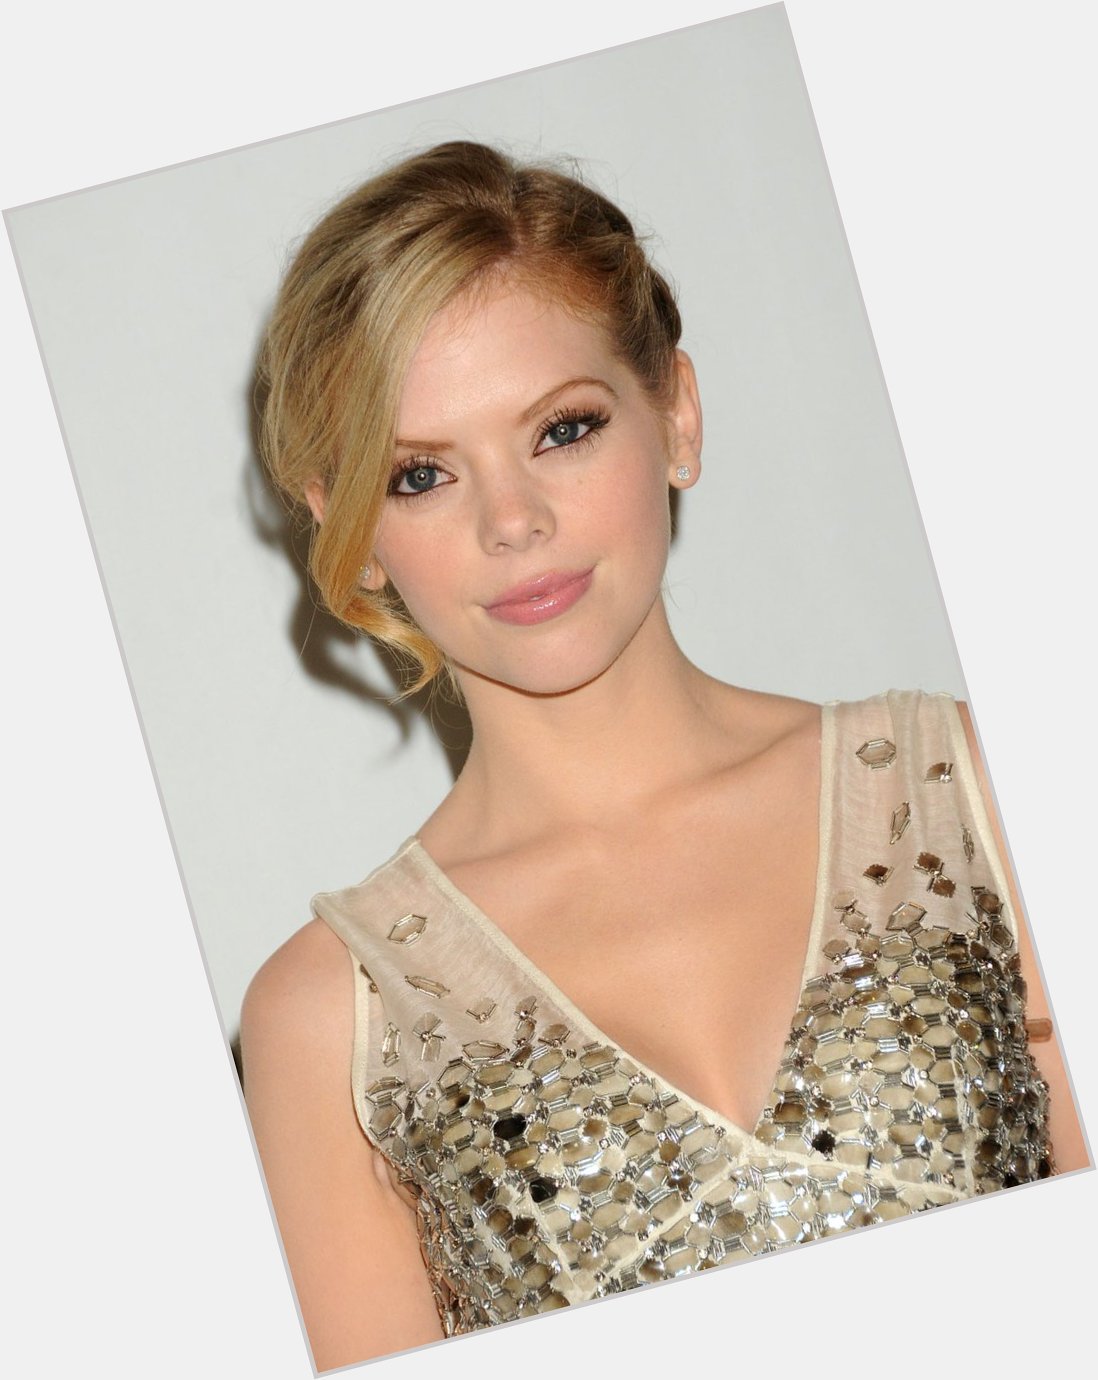 Happy 35th Birthday Shout Out to the very cute Dreama Walker!! 